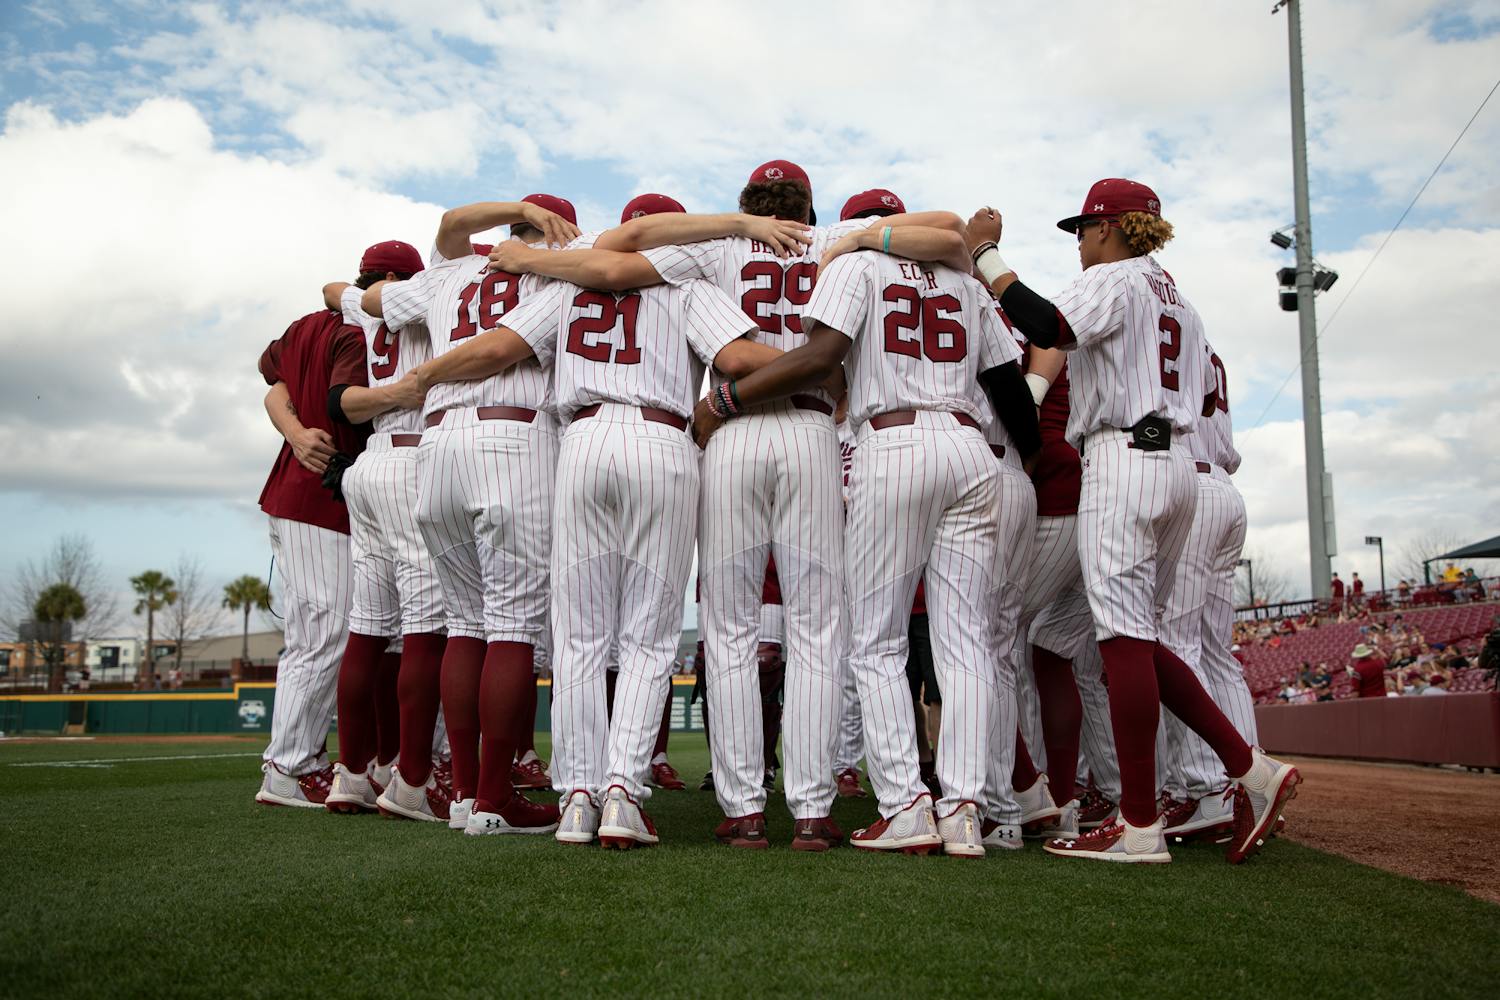 The South Carolina baseball team gathers for a pep talk before the first game of the George Washington series on Friday, Feb. 26, 2022. The Gamecocks won all three games of the series.